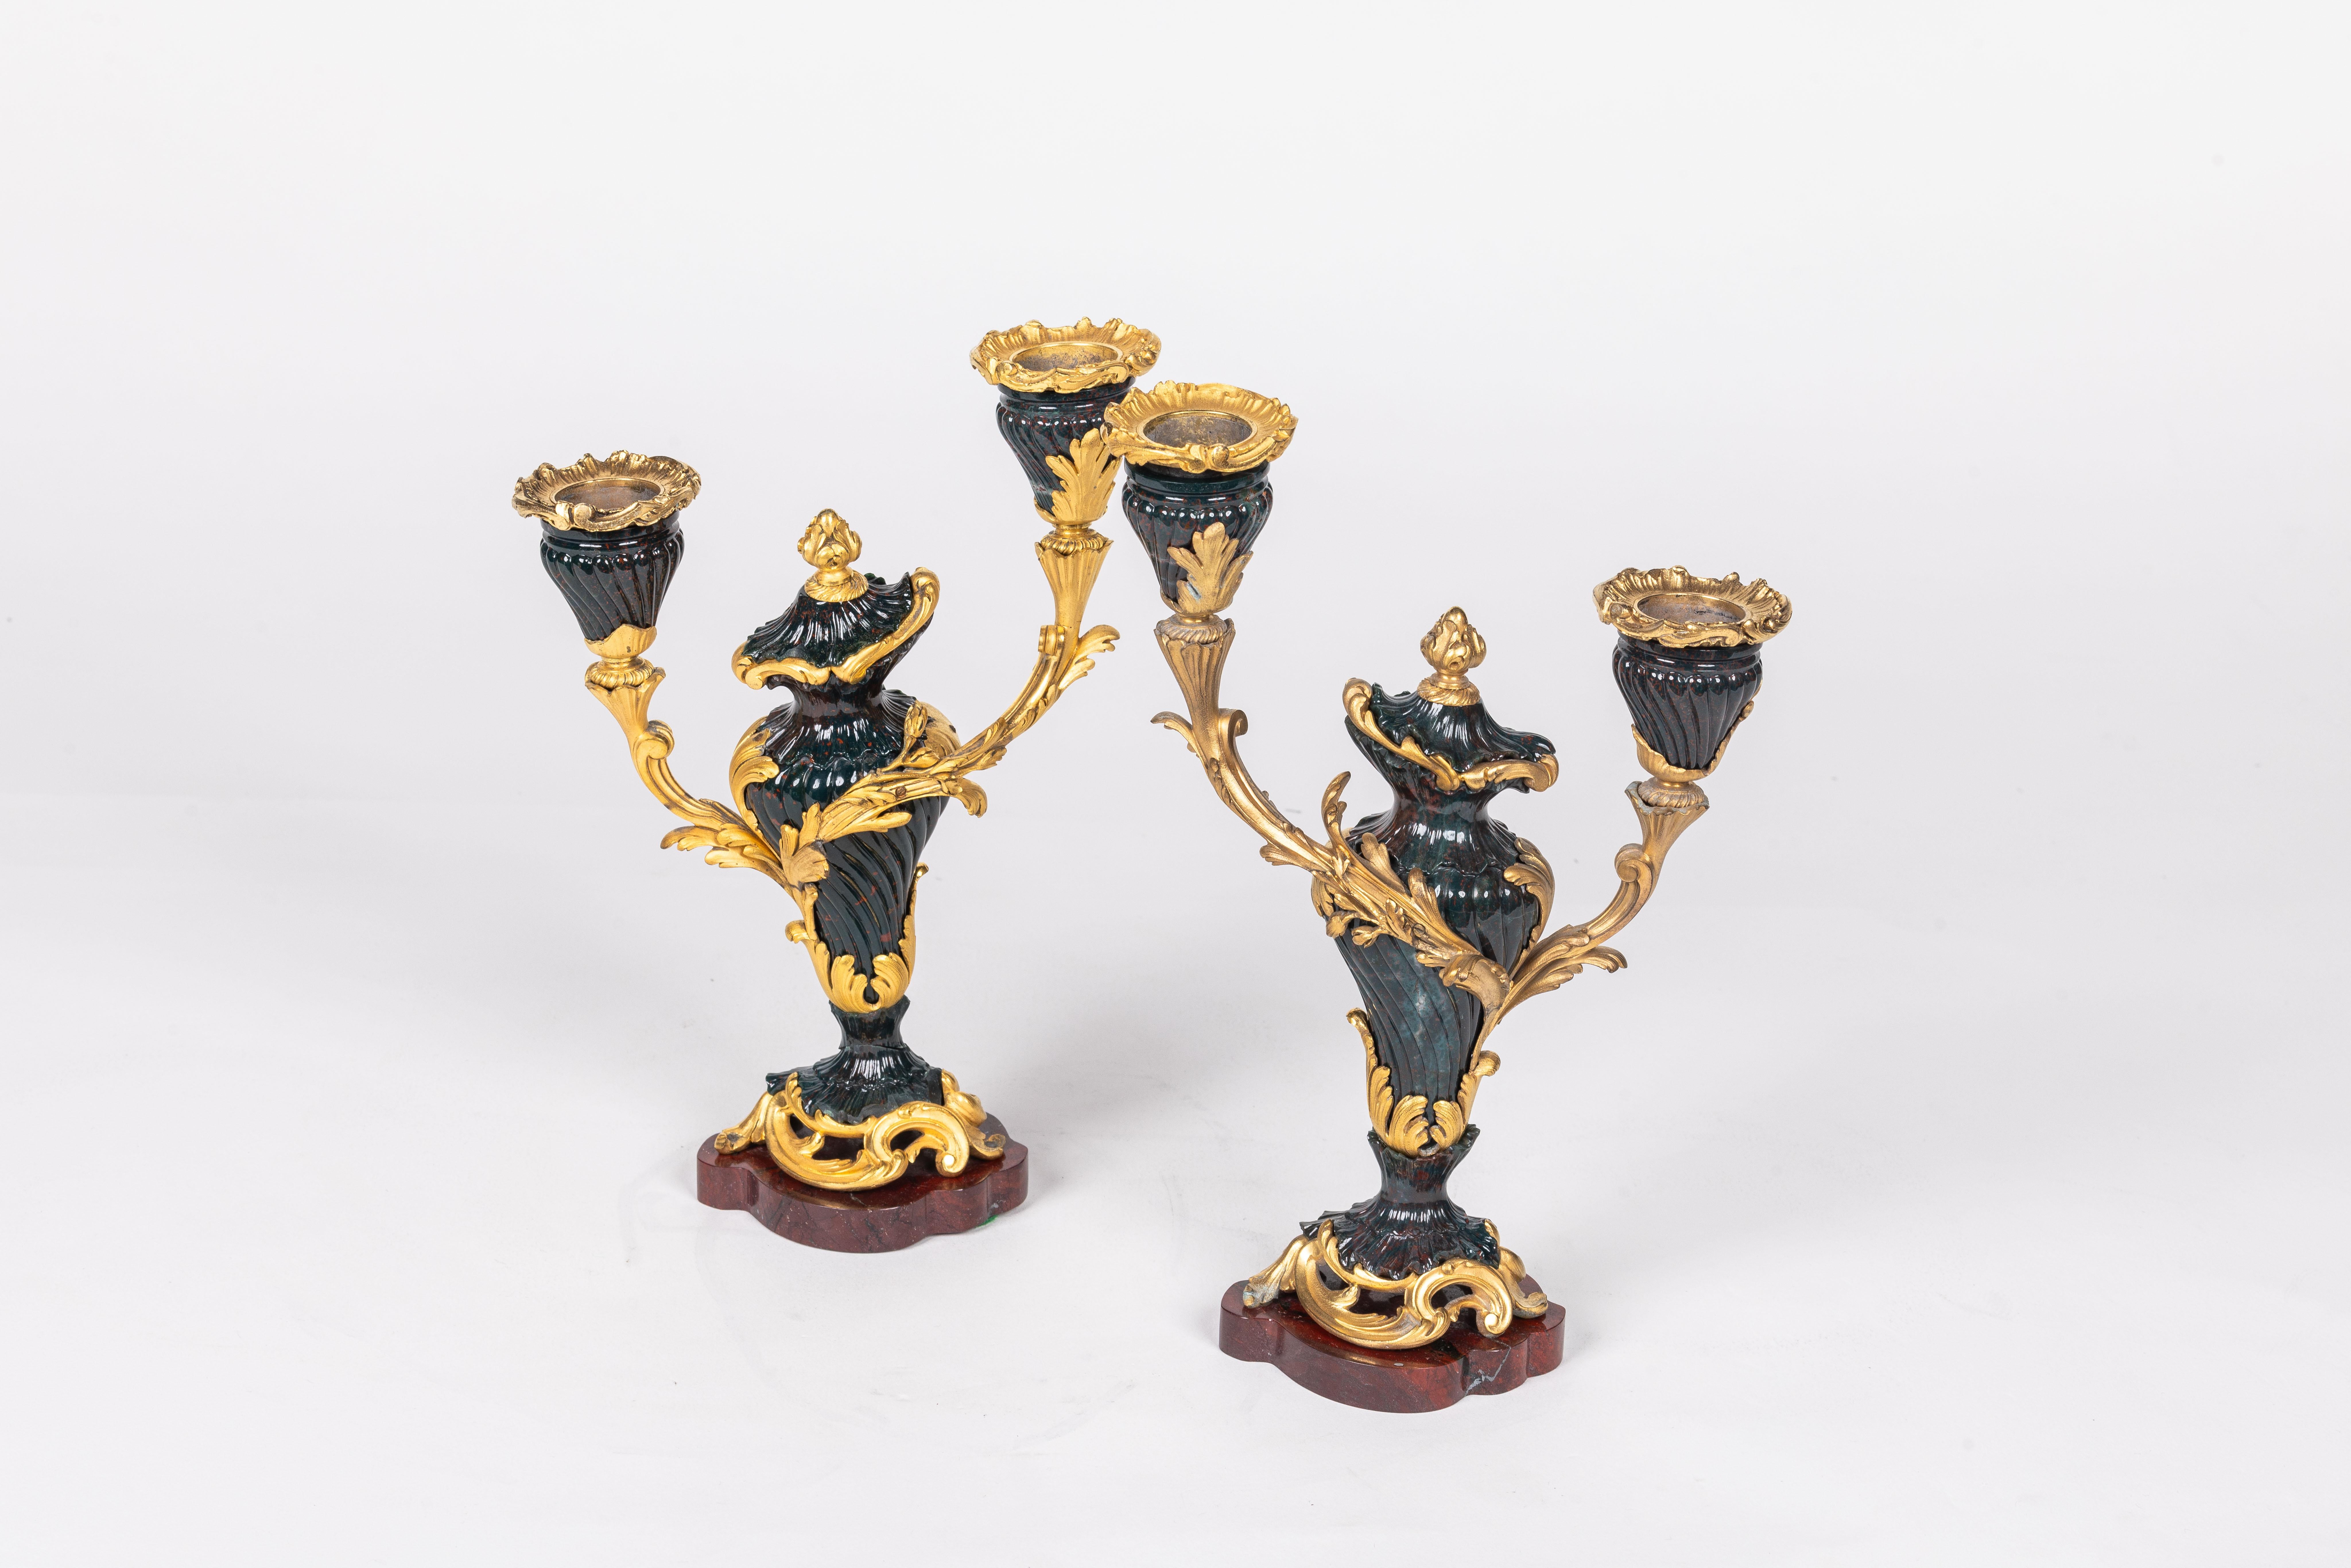 A Rare and Exquisite Pair of Ormolu-Mounted Bloodstone Two-Light Candlesticks For Sale 1